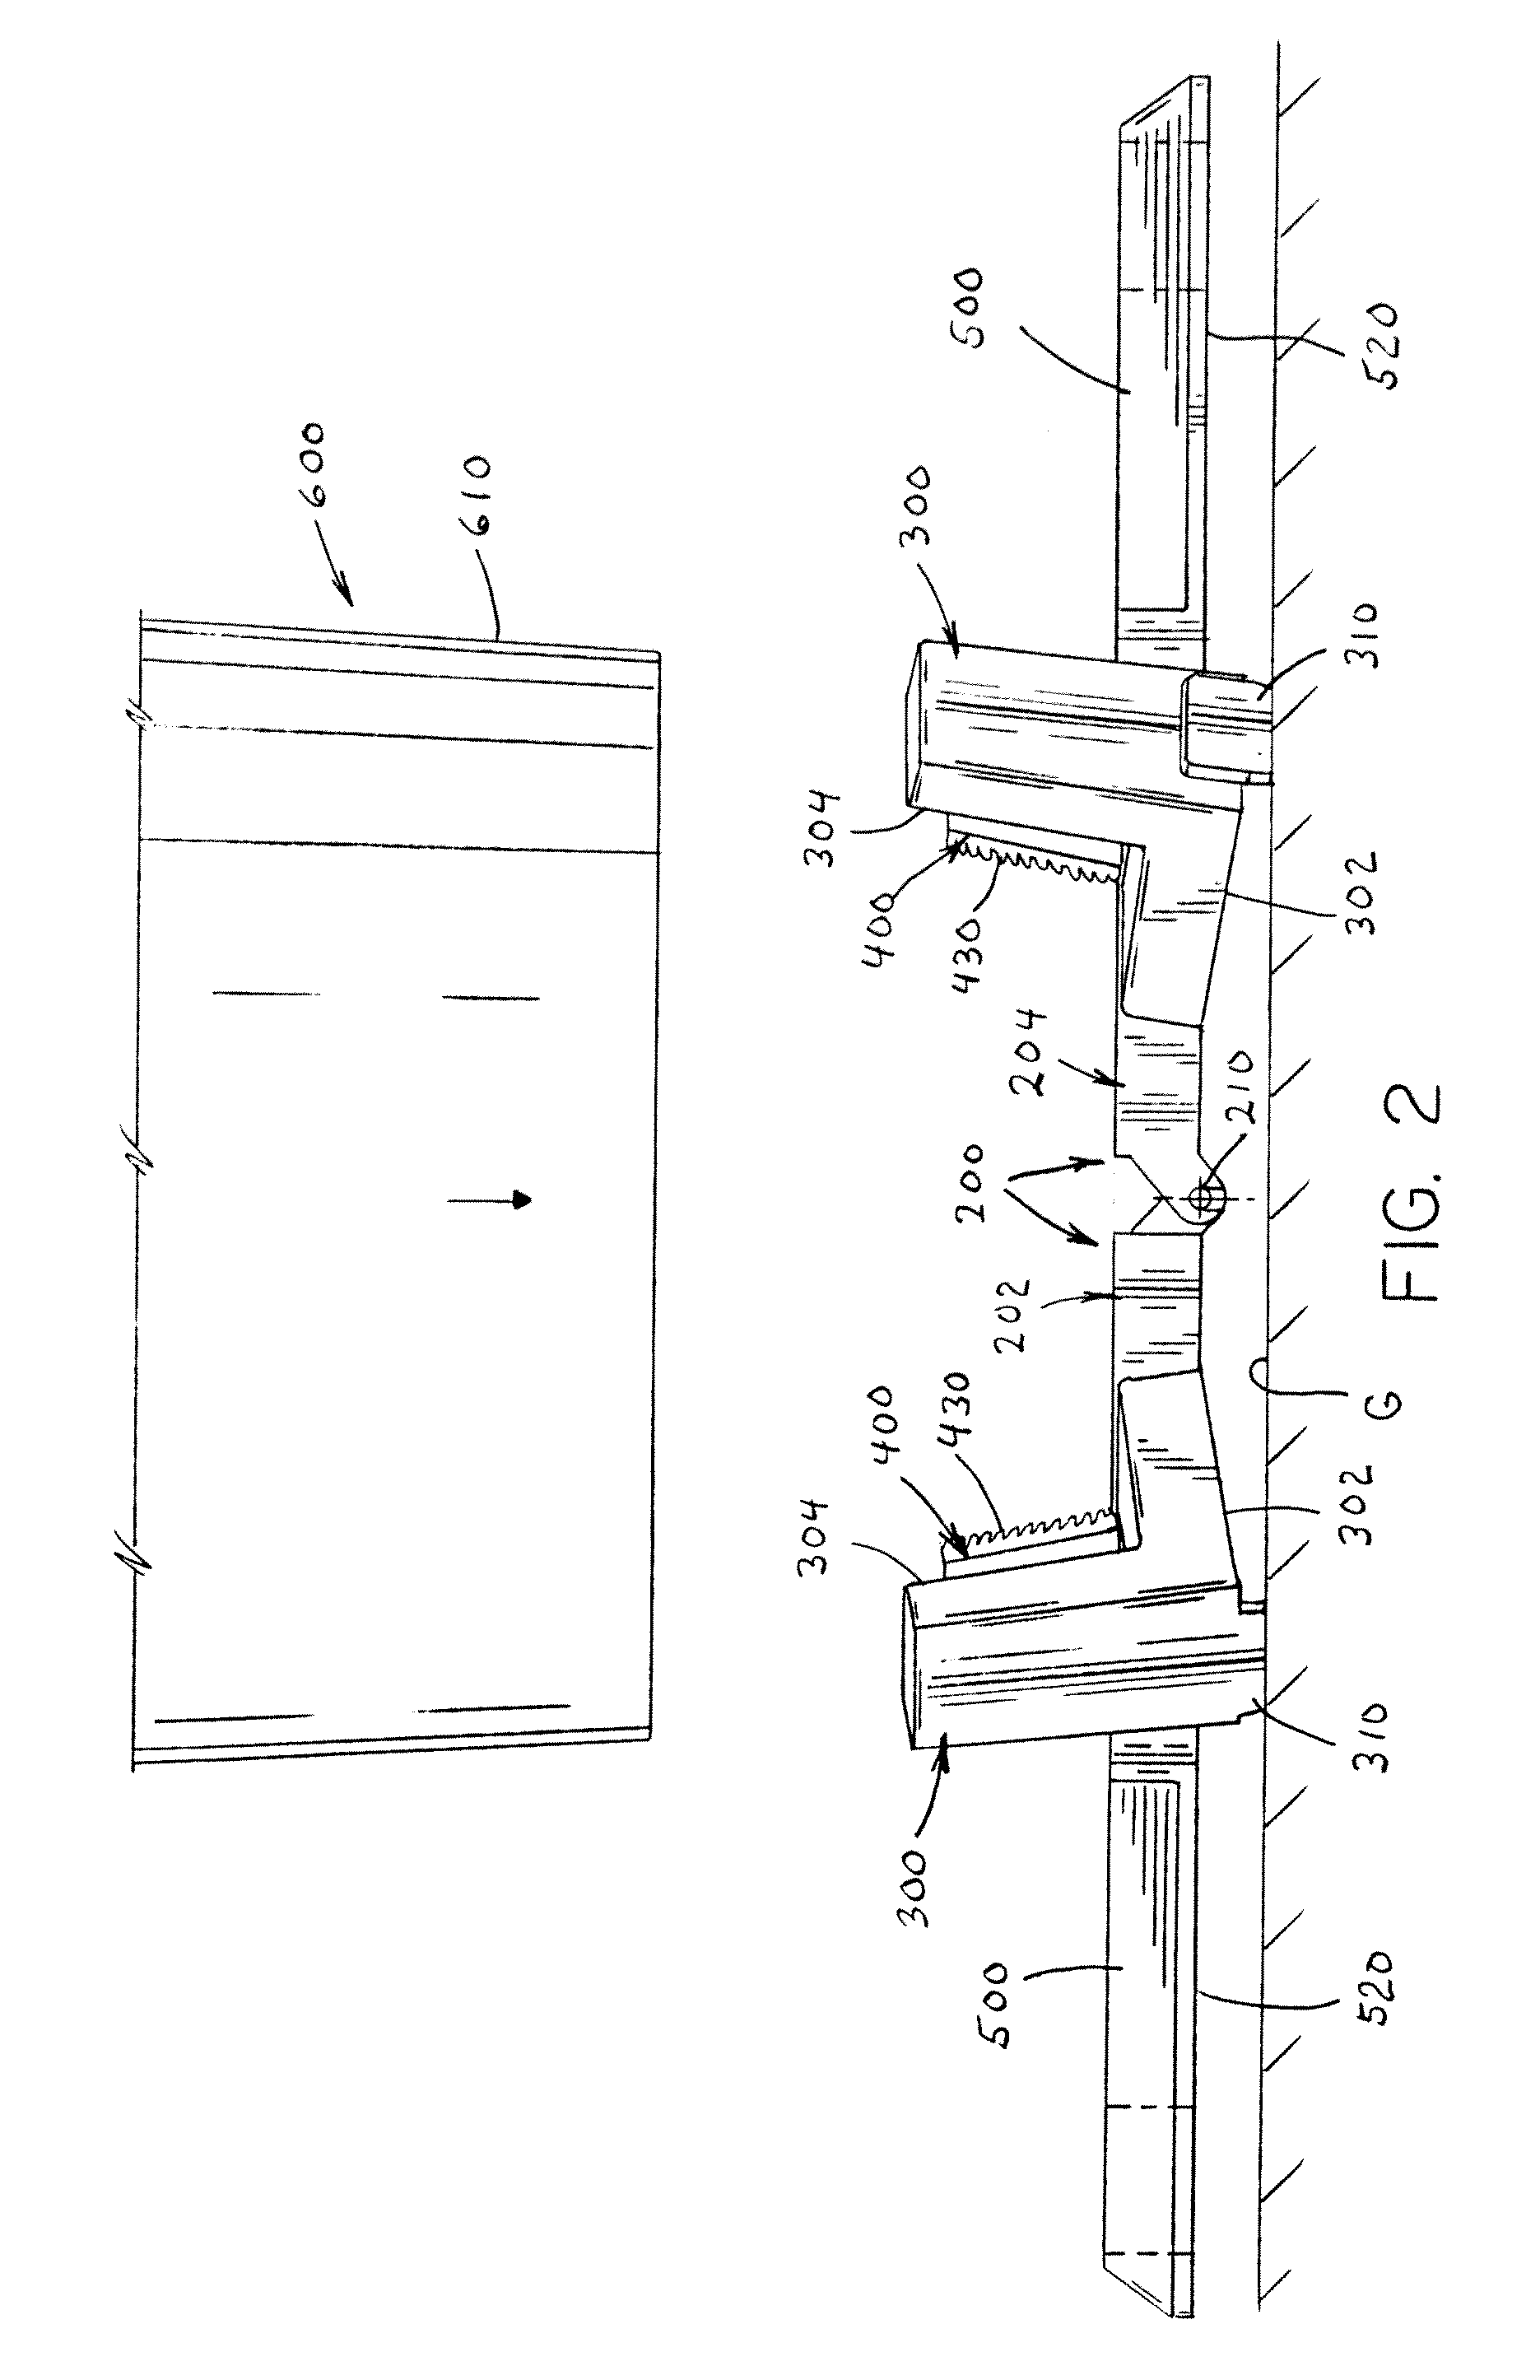 Receptacle securing device